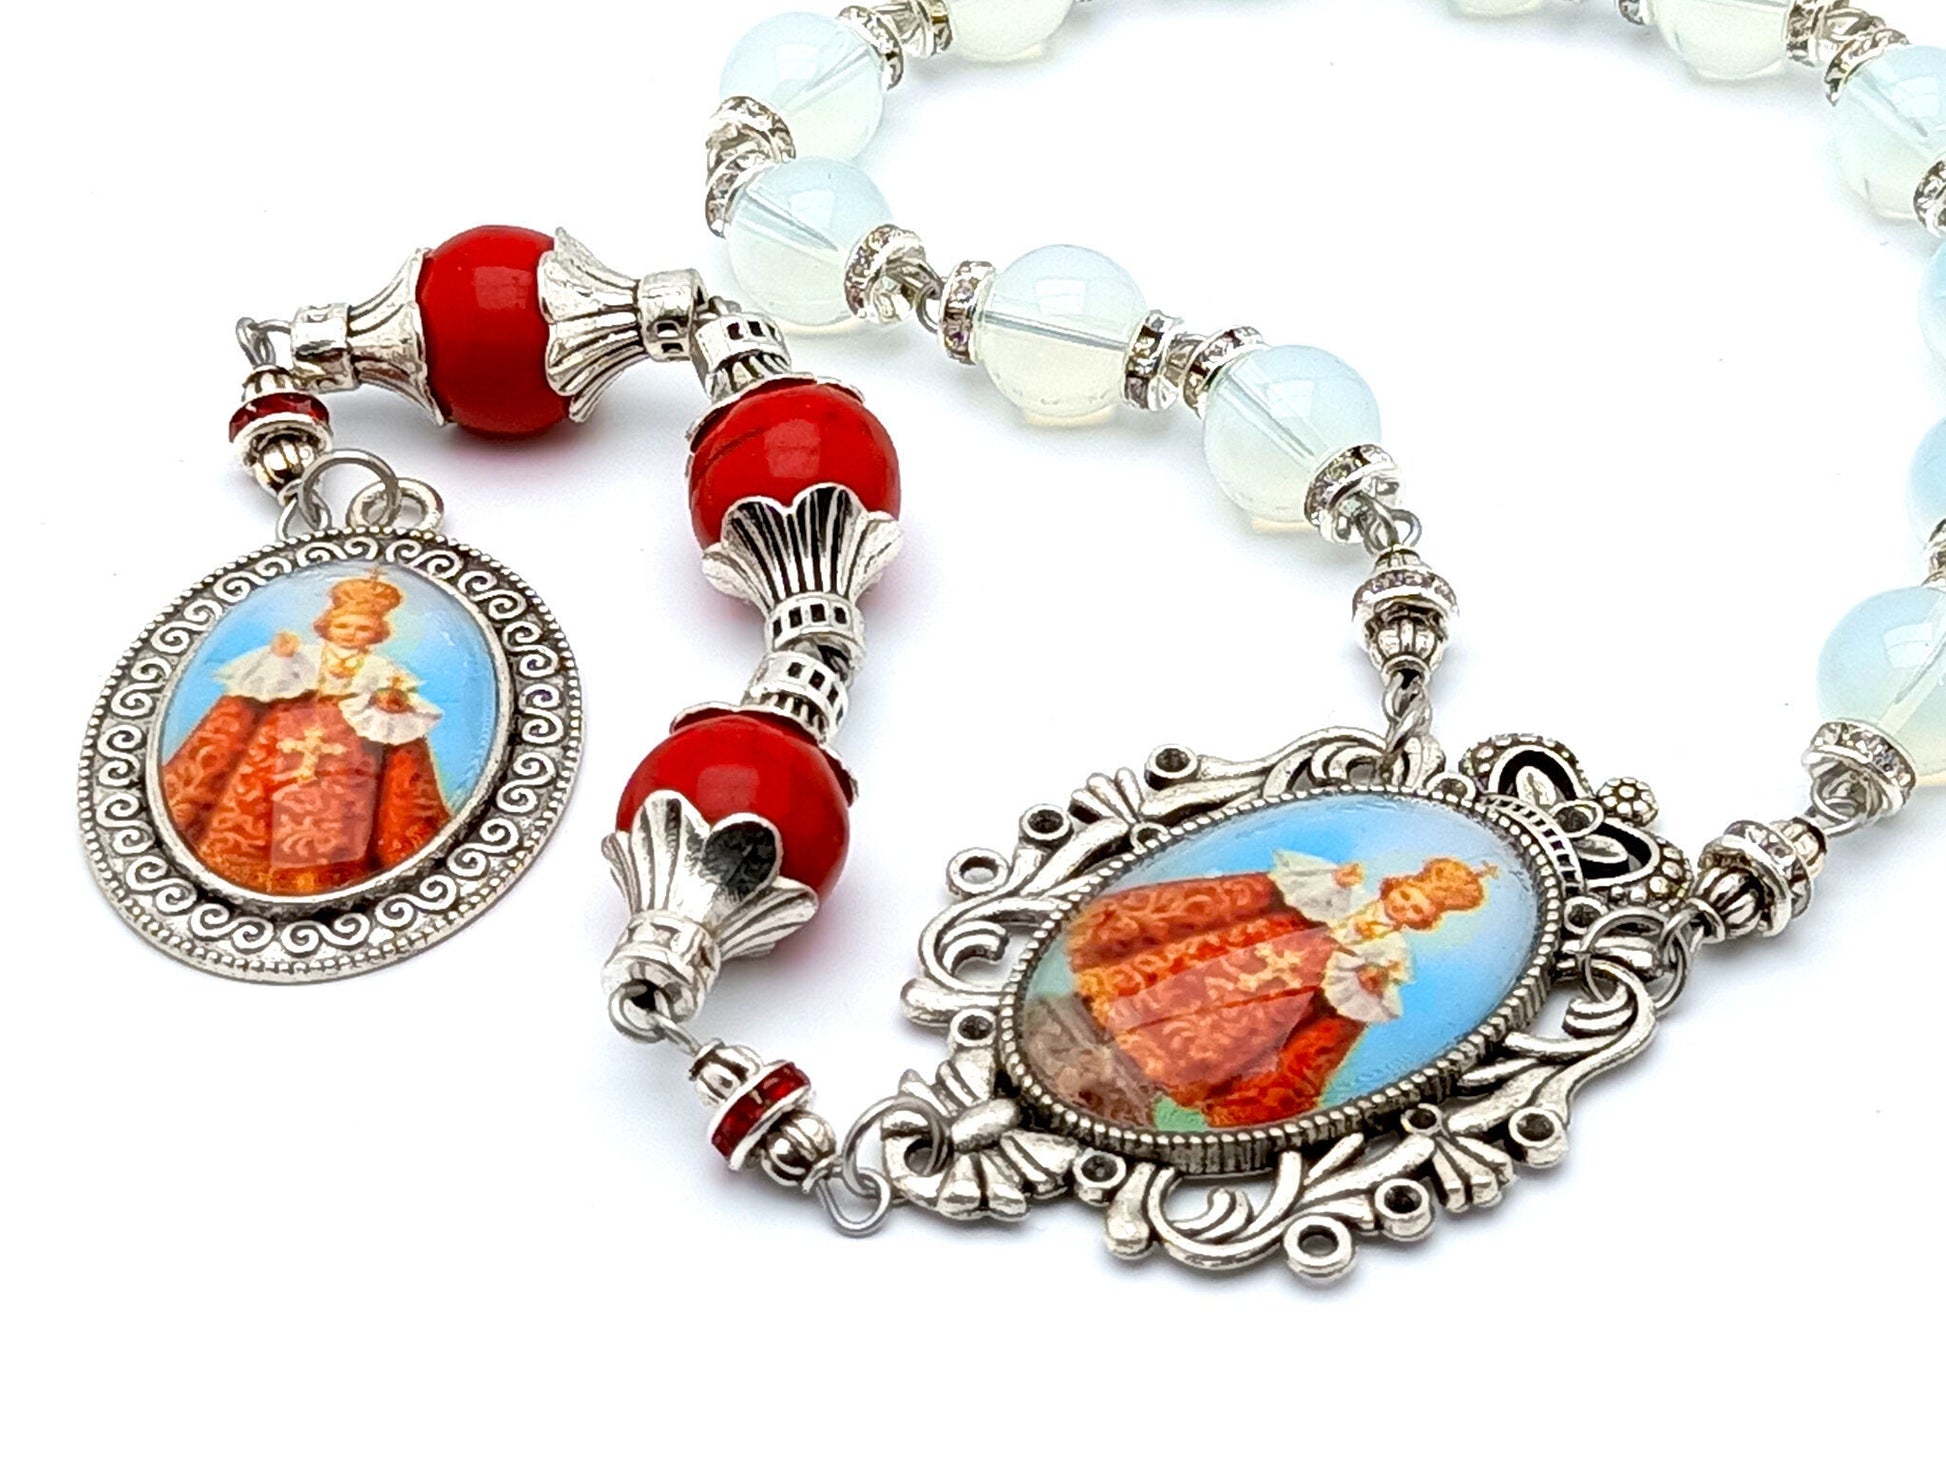 Infant of Prague unique rosary beads prayer chaplet with opal and red gemstone beads, silver picture centre and end medals.